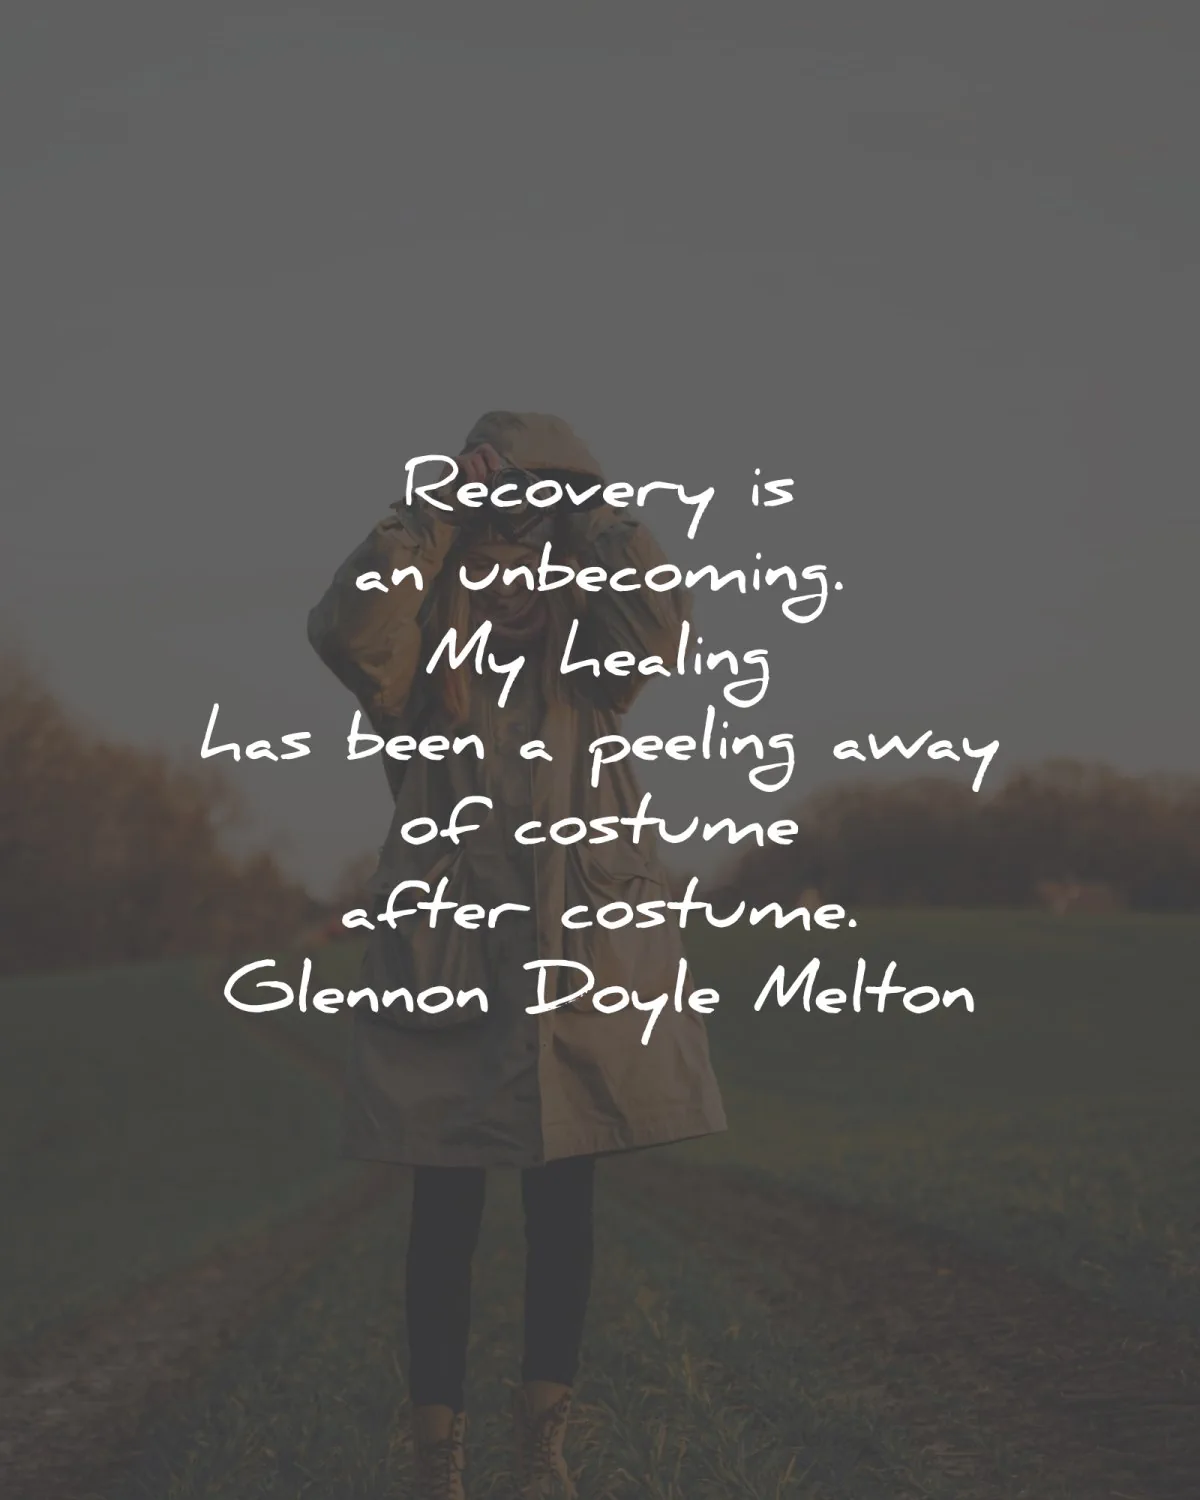 recovery quotes unbecoming healing costume glennon doyle melton wisdom